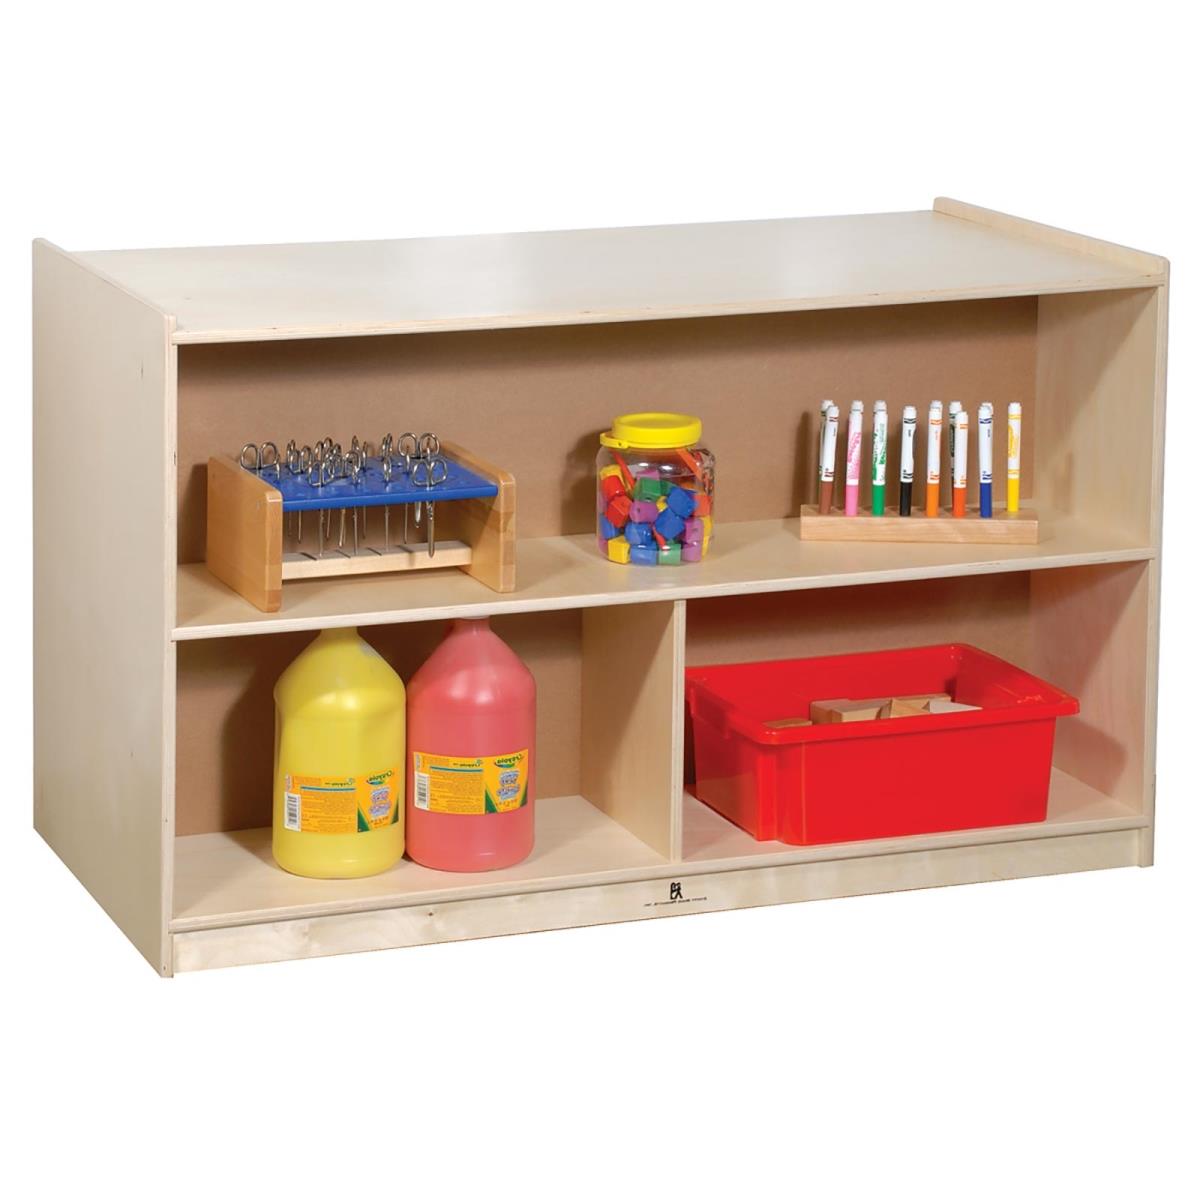 Angeles Ang1228 Brich Double-sided Storage - Uv Finish - 31 X 48 X 24 In.